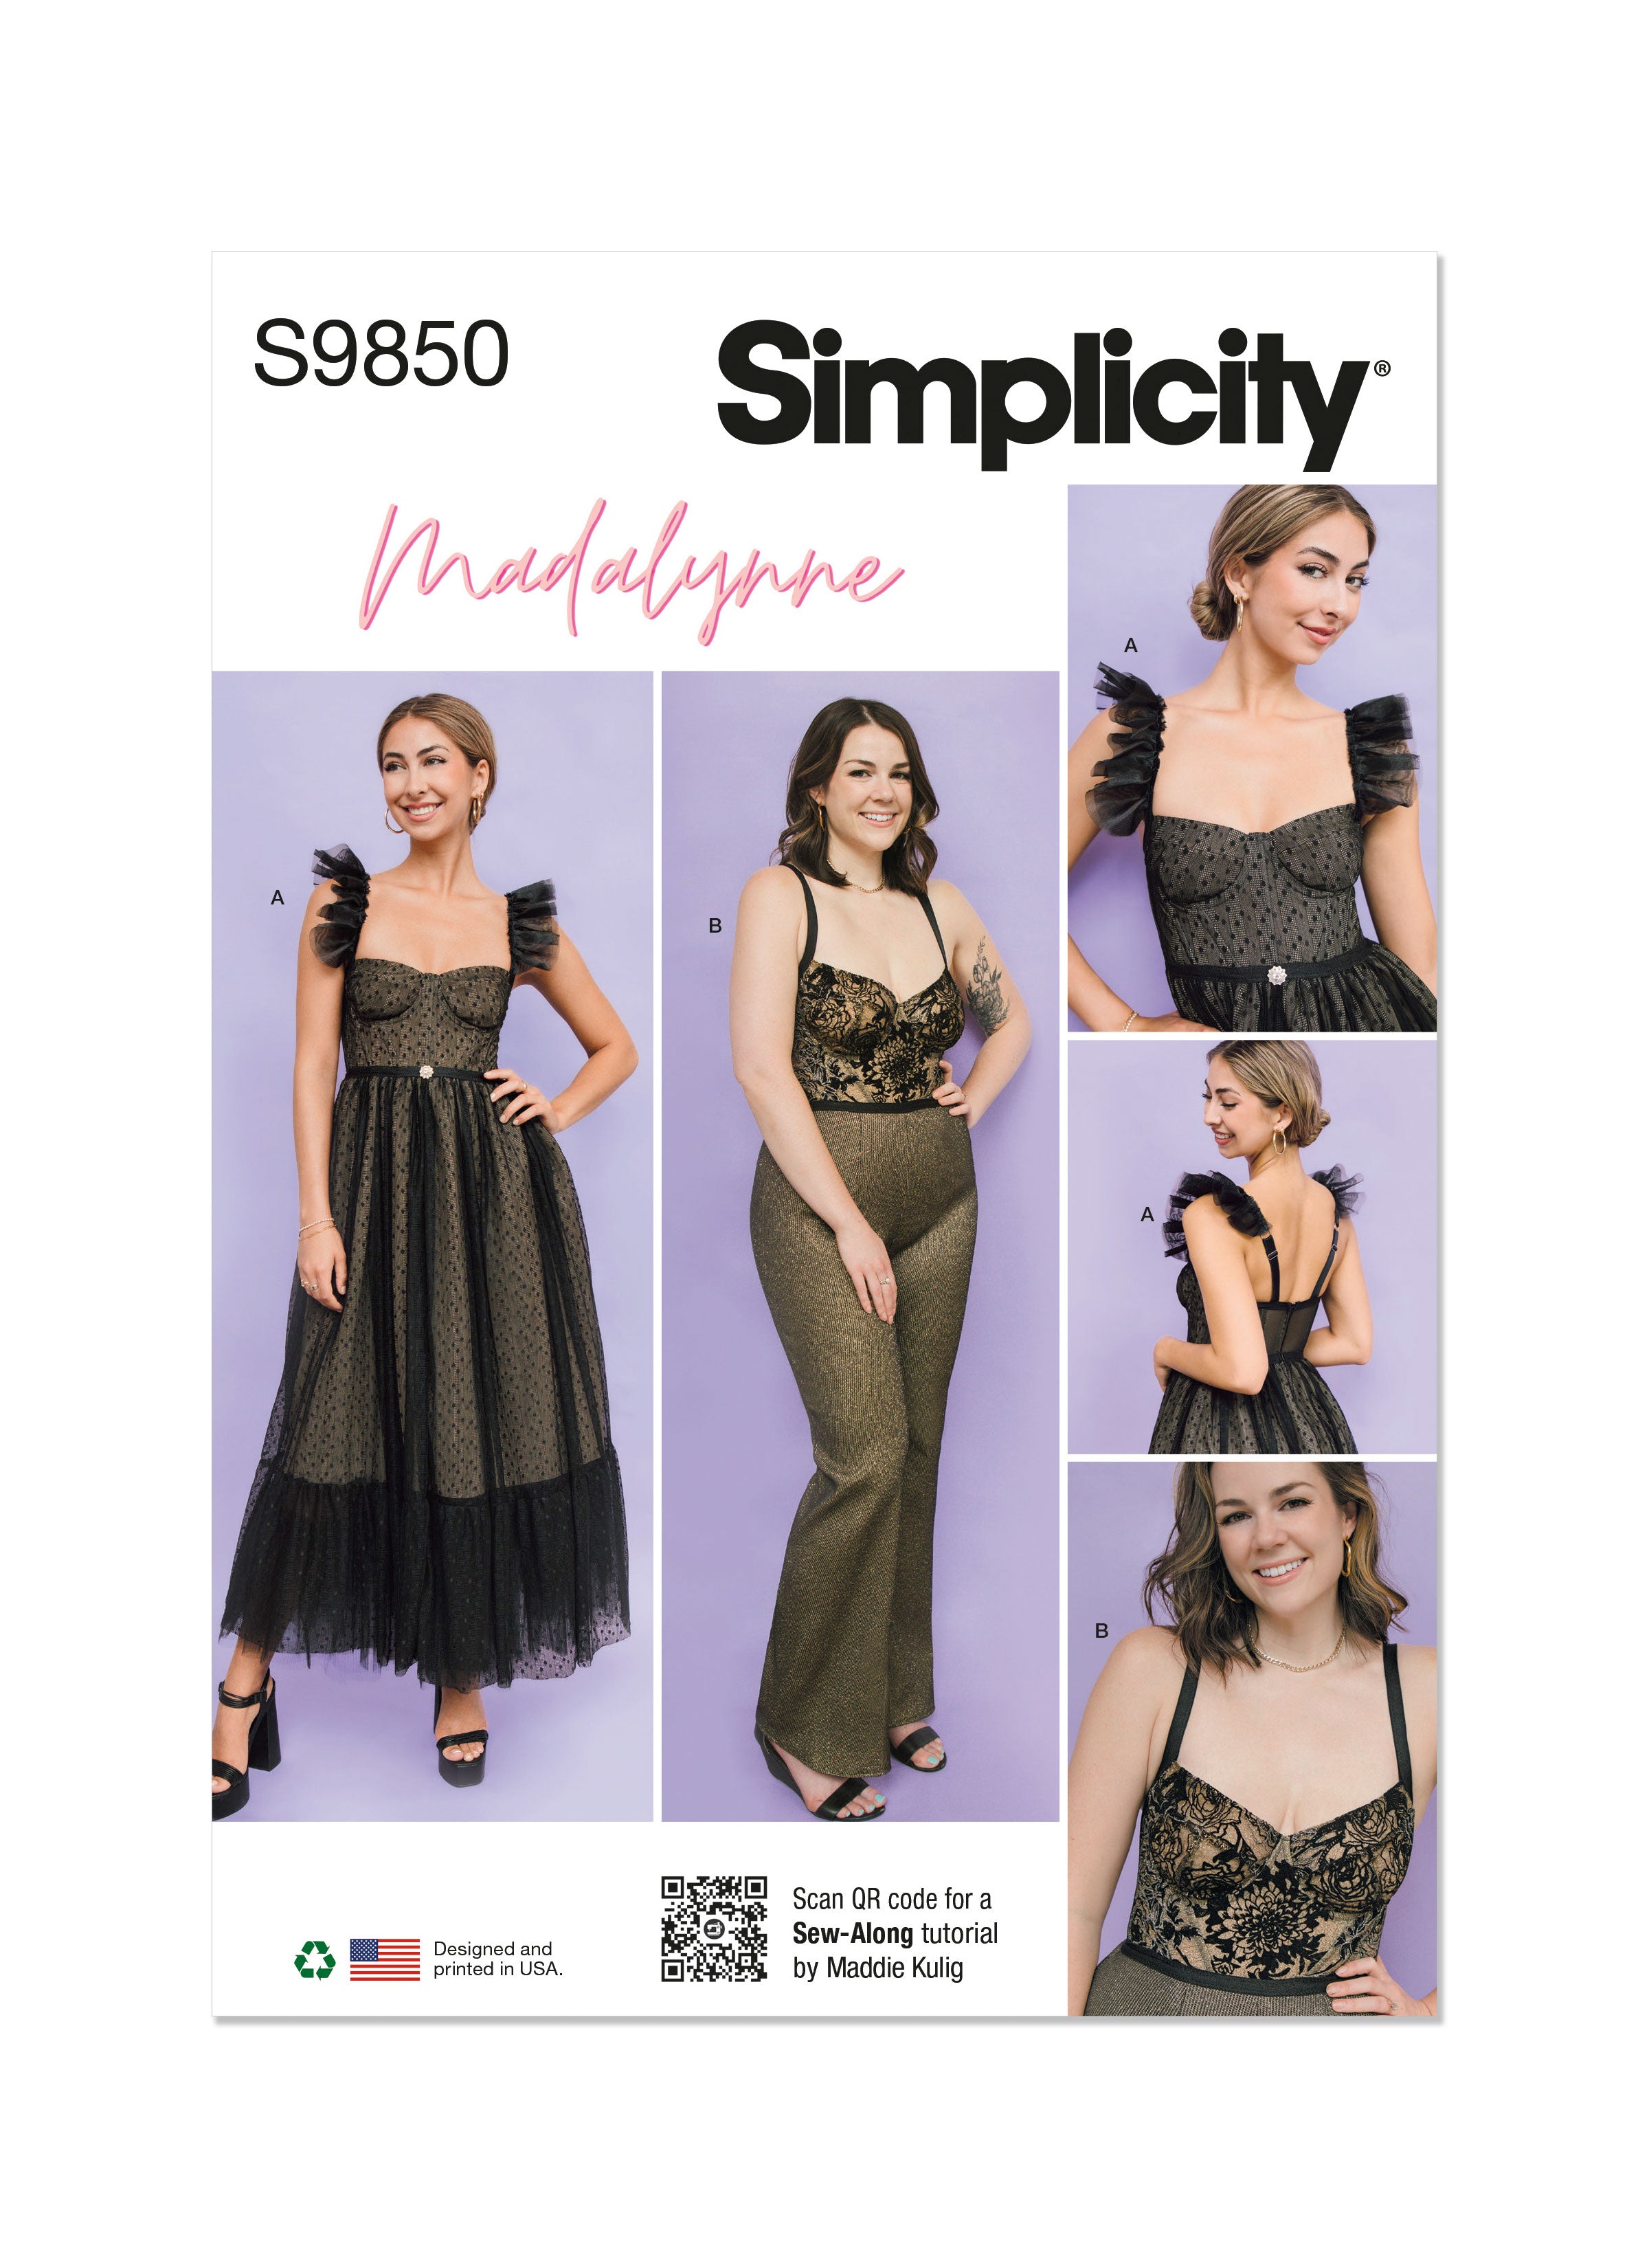 Simplicity Sewing Pattern 9850 Dress and Jumpsuit by Madalynne Intimates from Jaycotts Sewing Supplies